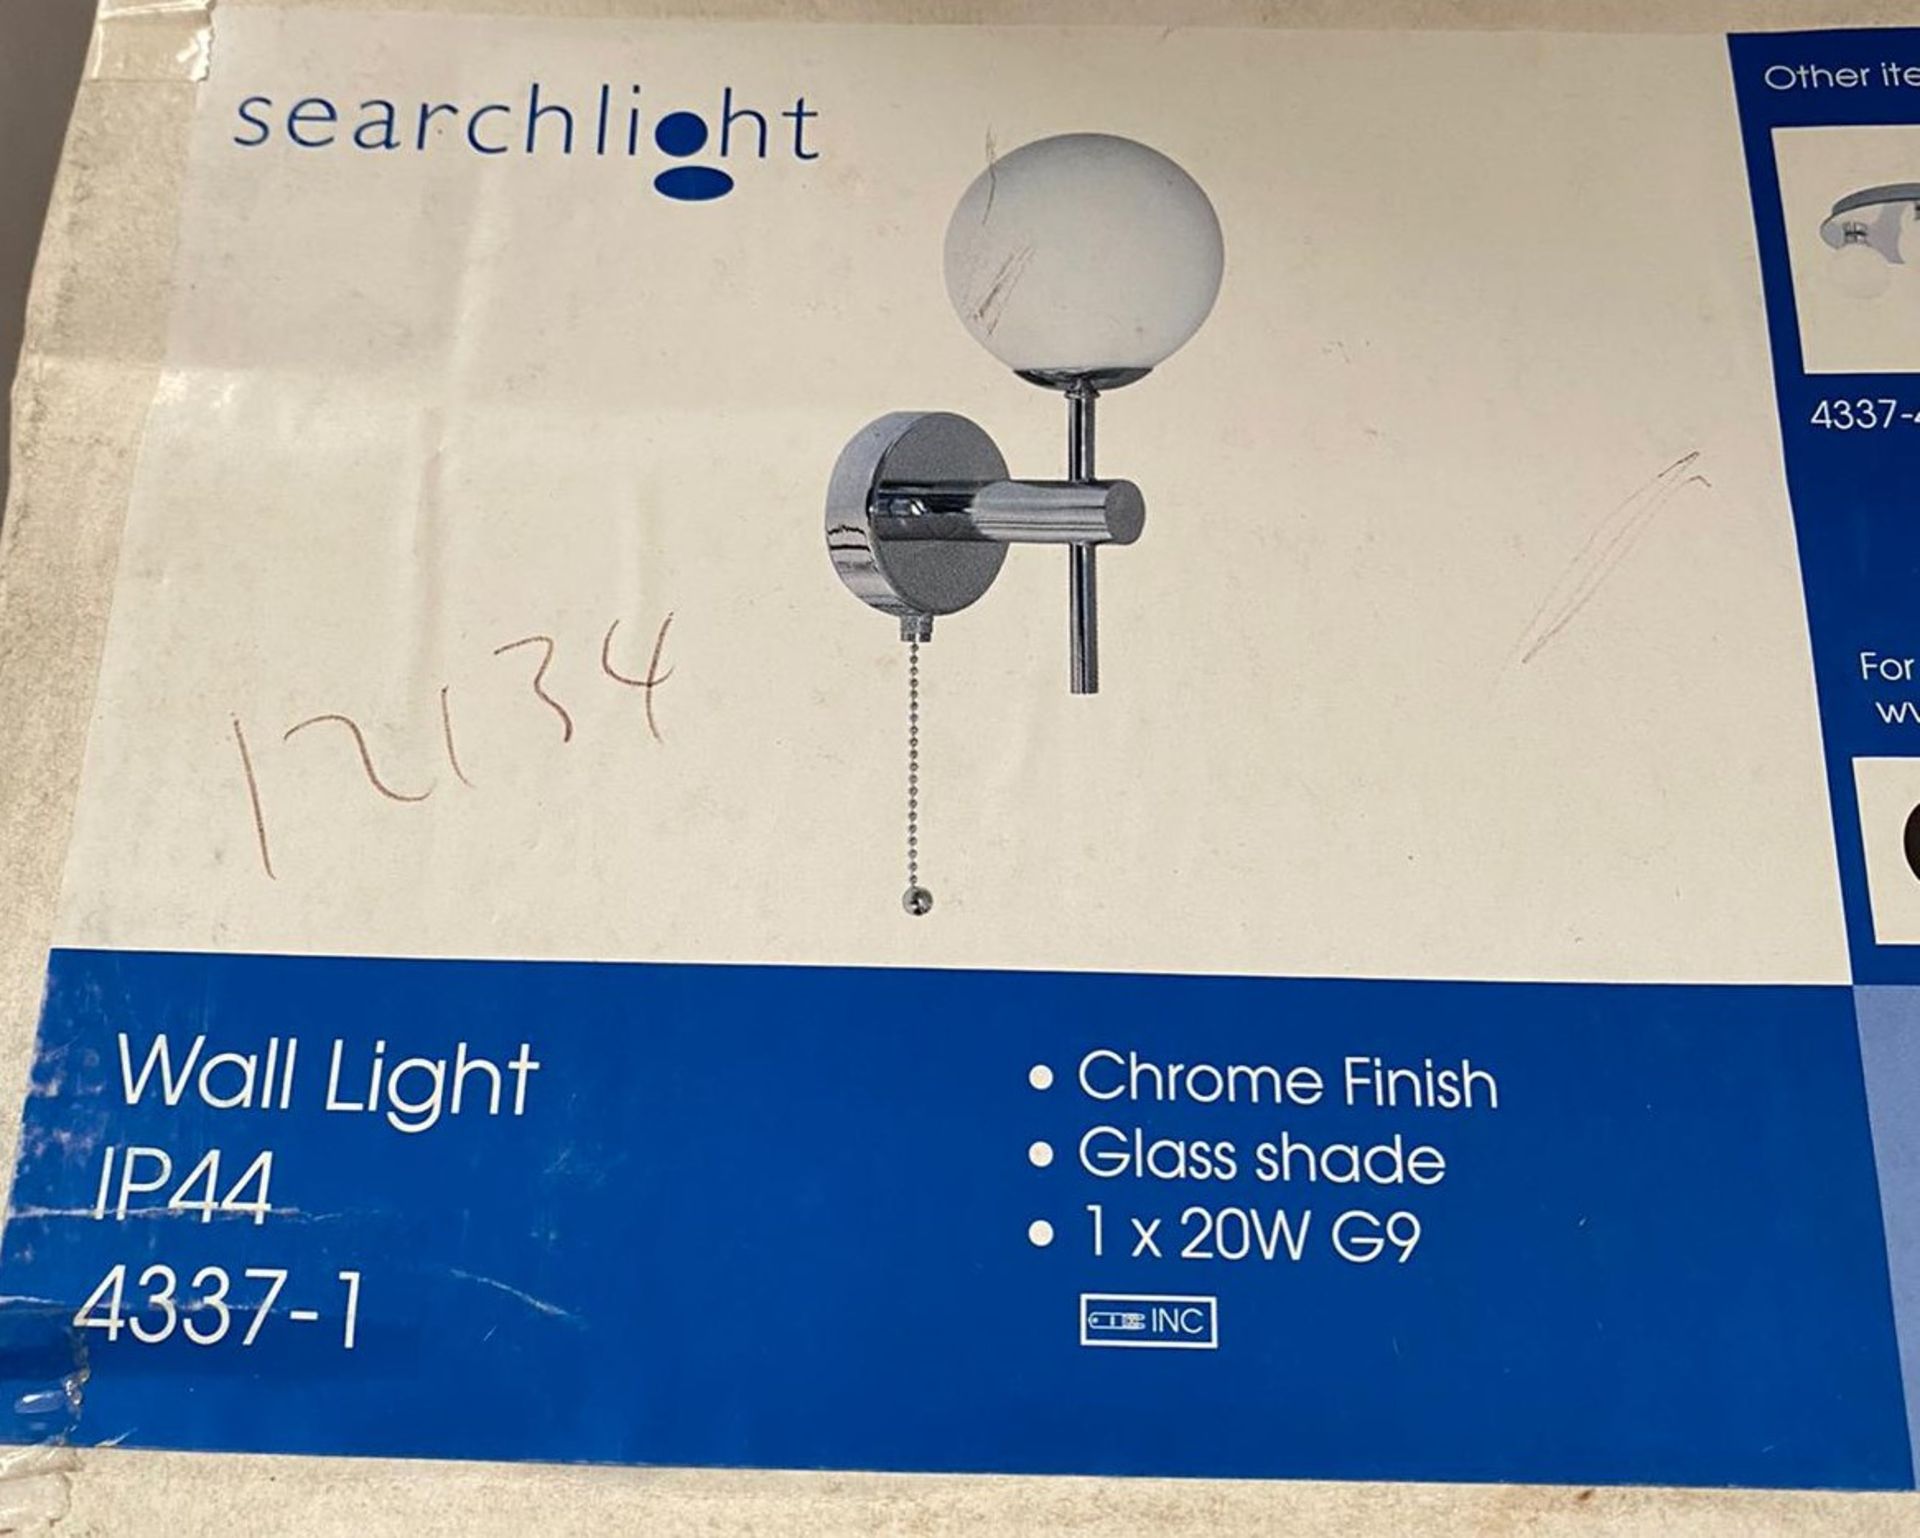 1 x Searchlight LED Wall Light in chrome with a glass shade - Ref: 4337-1 - New and Boxed Stock